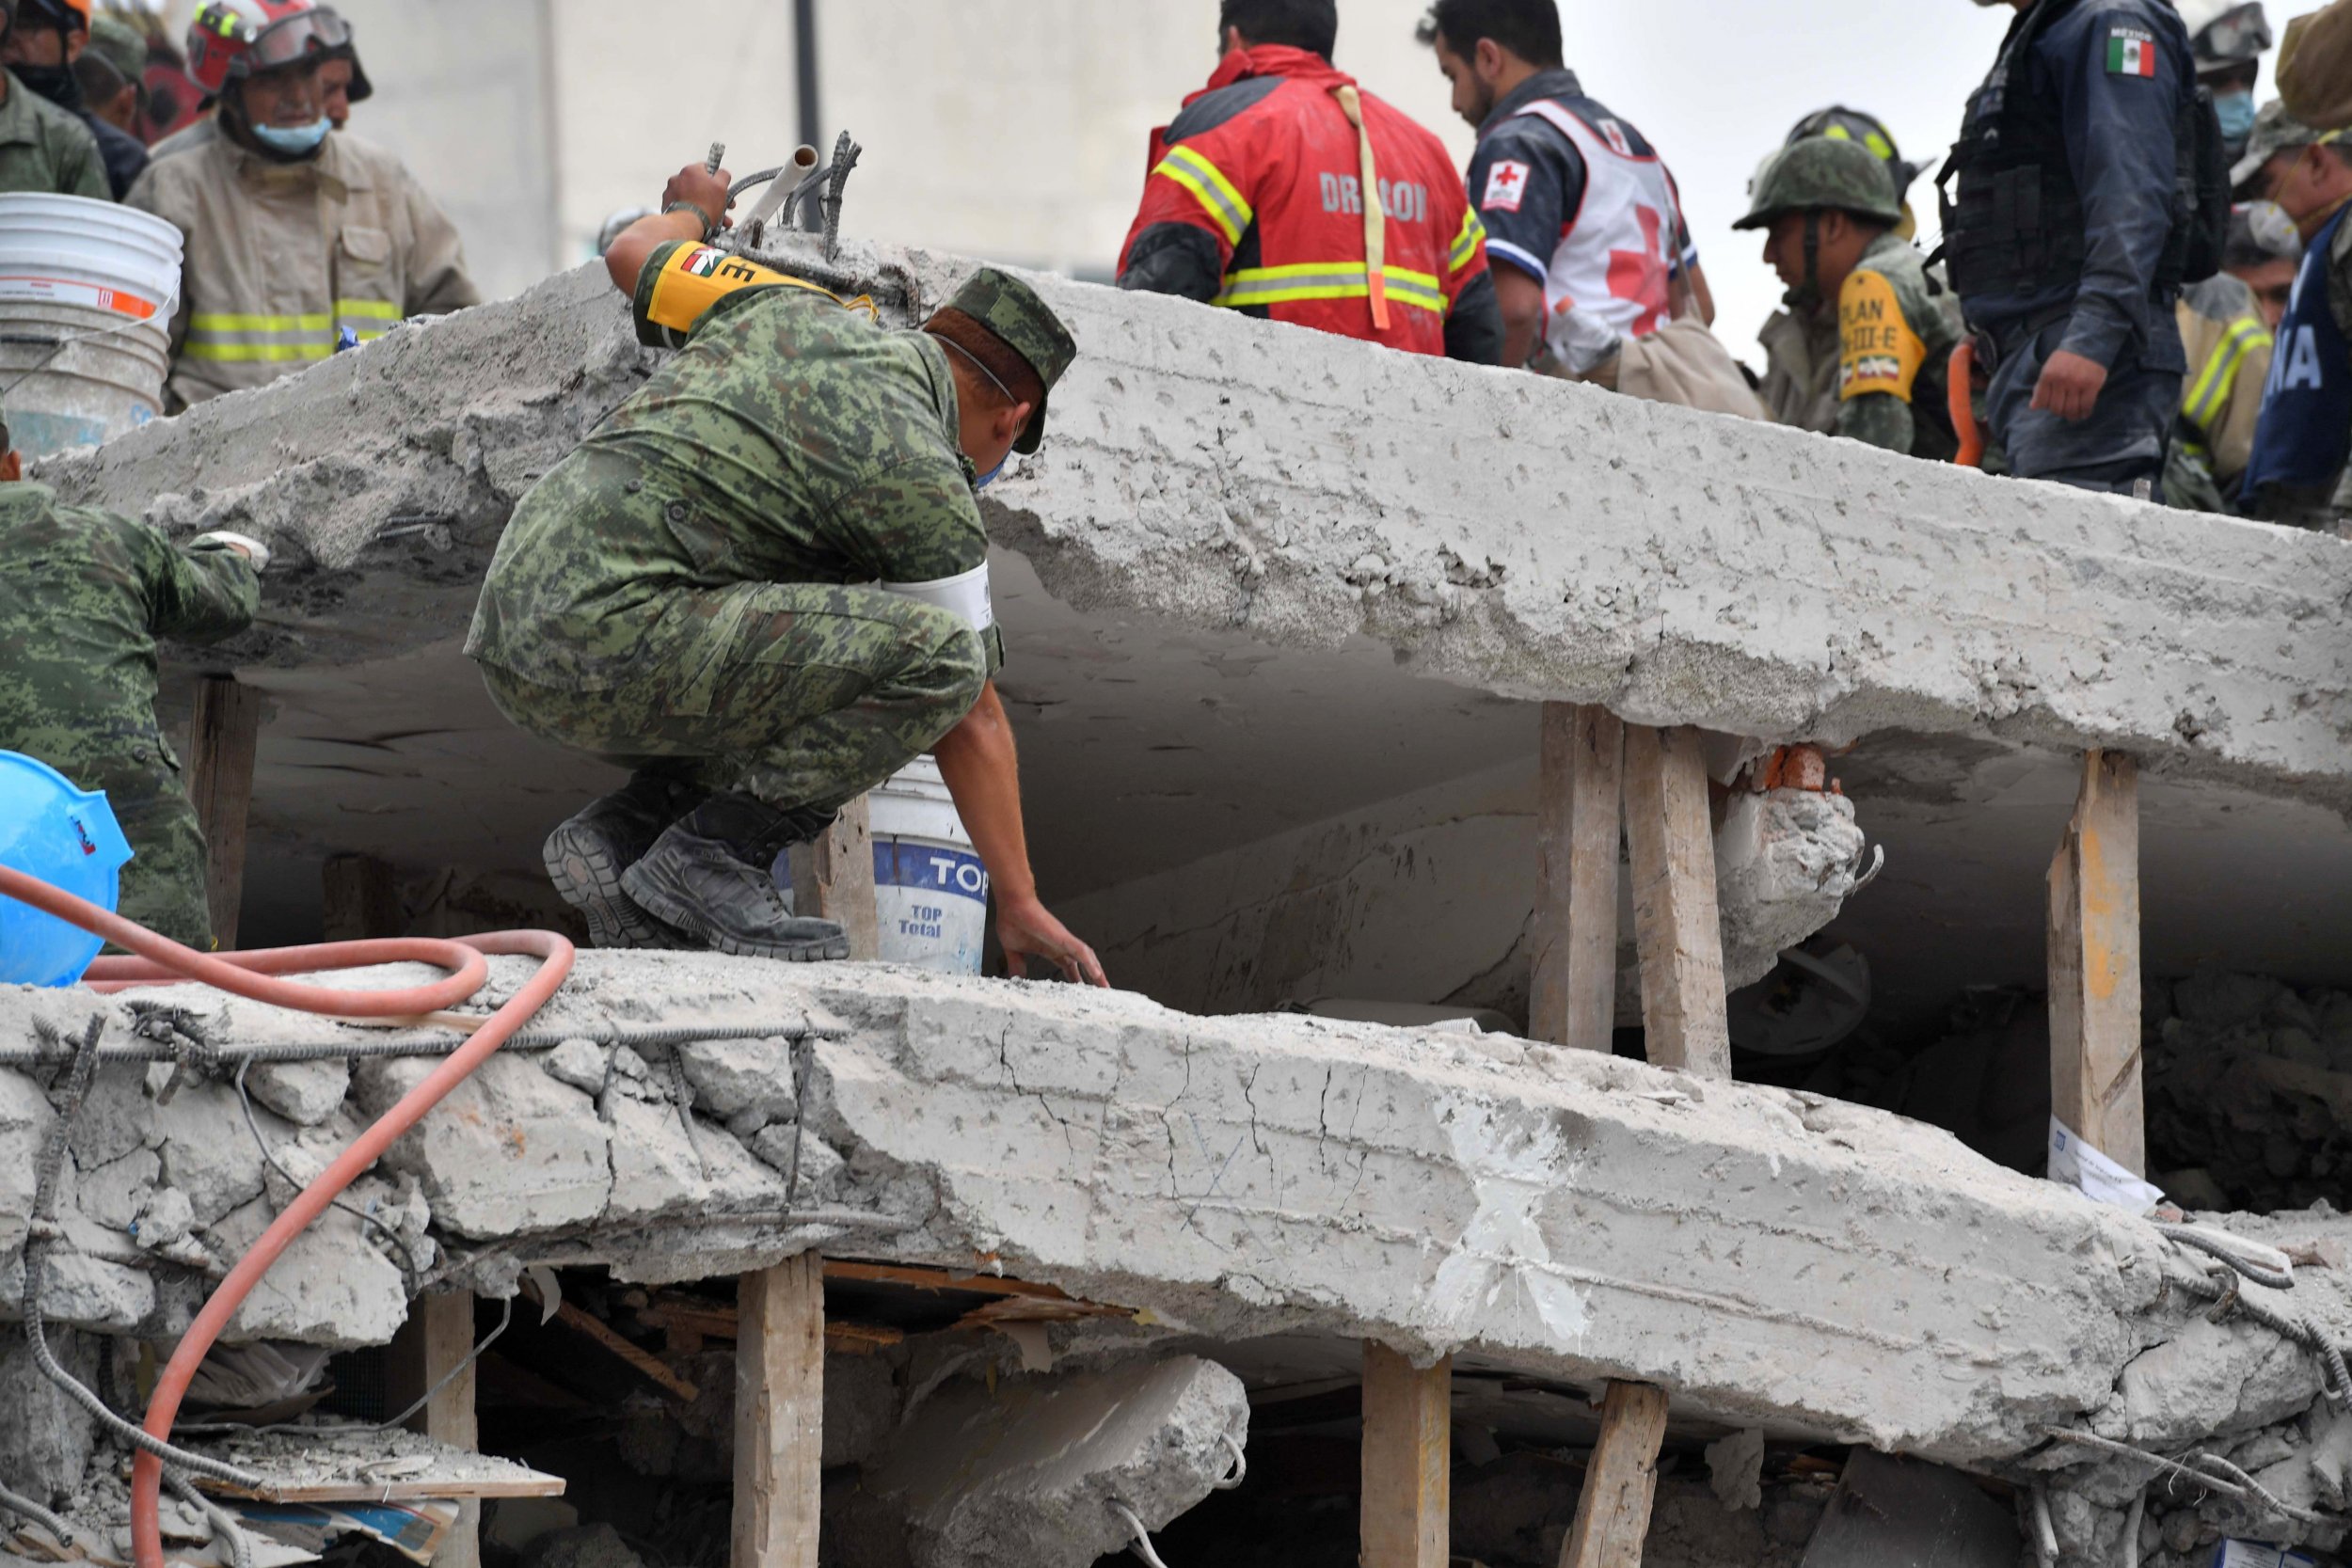 Mexico Earthquake Photos Dozens Pulled from Rubble as Death Toll